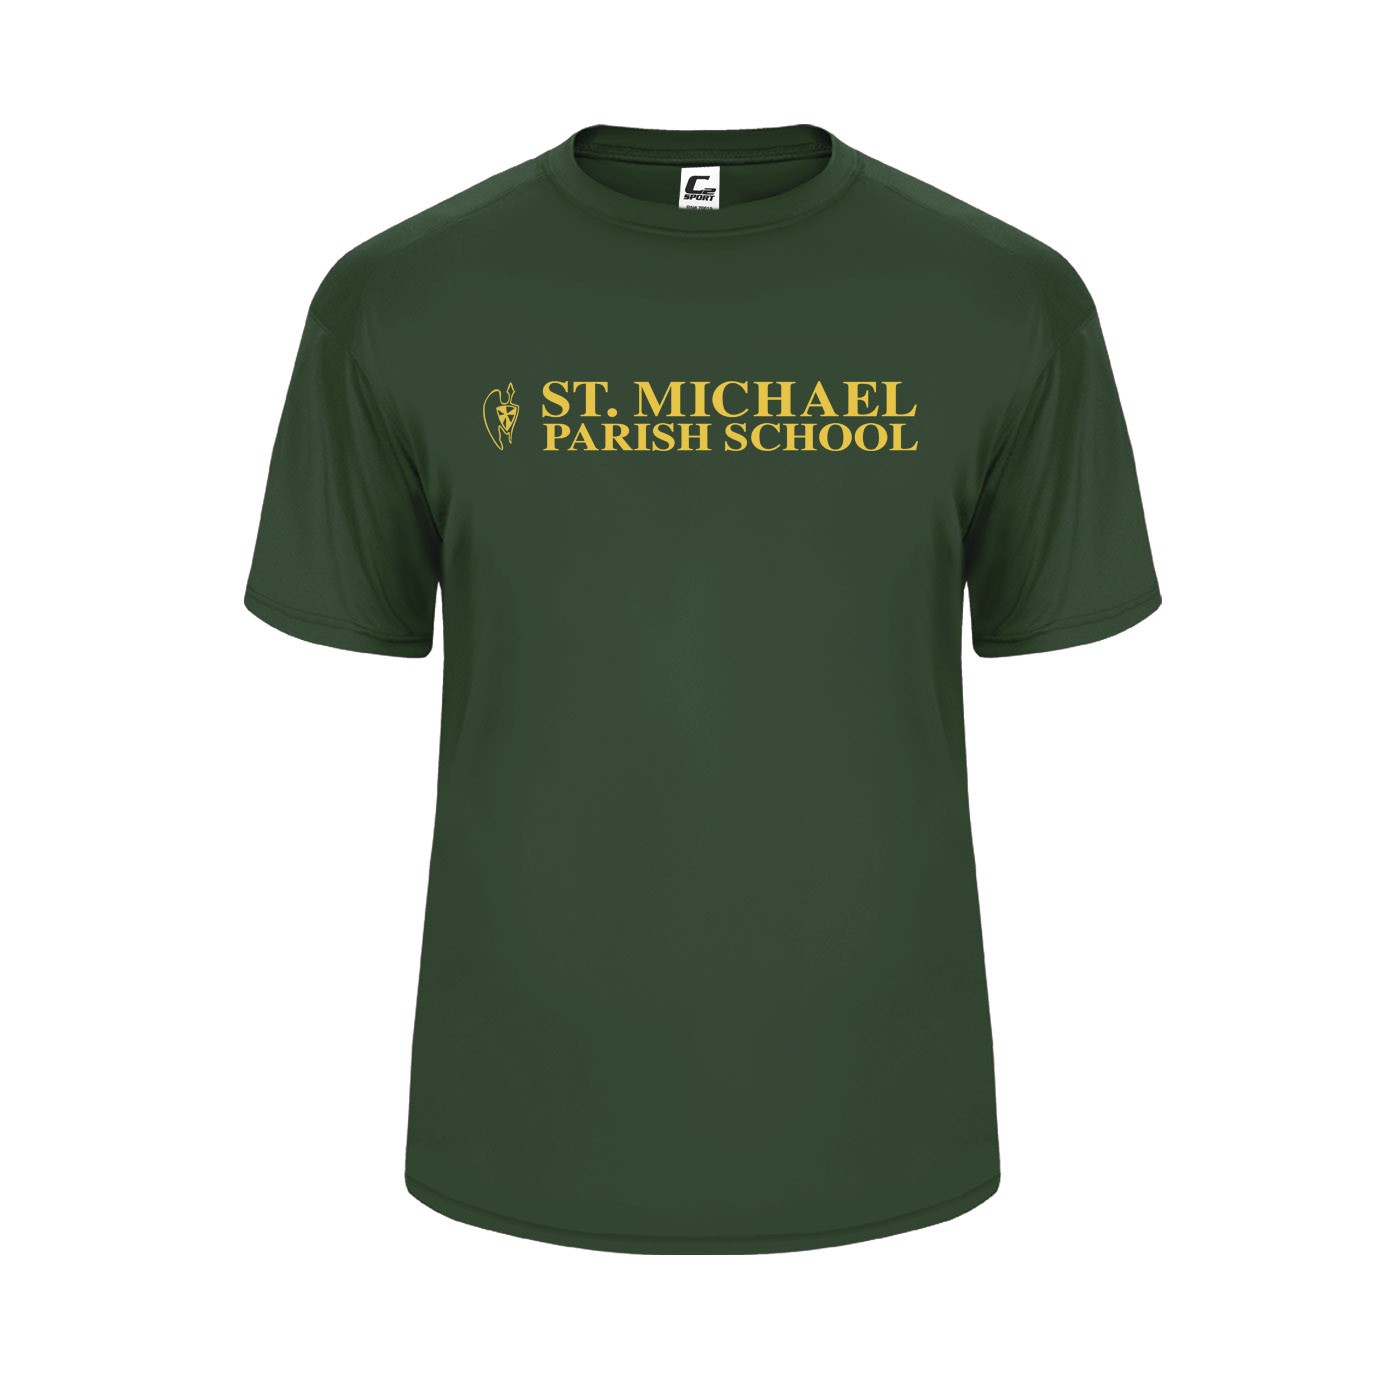 SMSU Spirit S/S Performance T-Shirt w/ Gold Logo #3 - Please Allow 3-4 Weeks for Delivery 